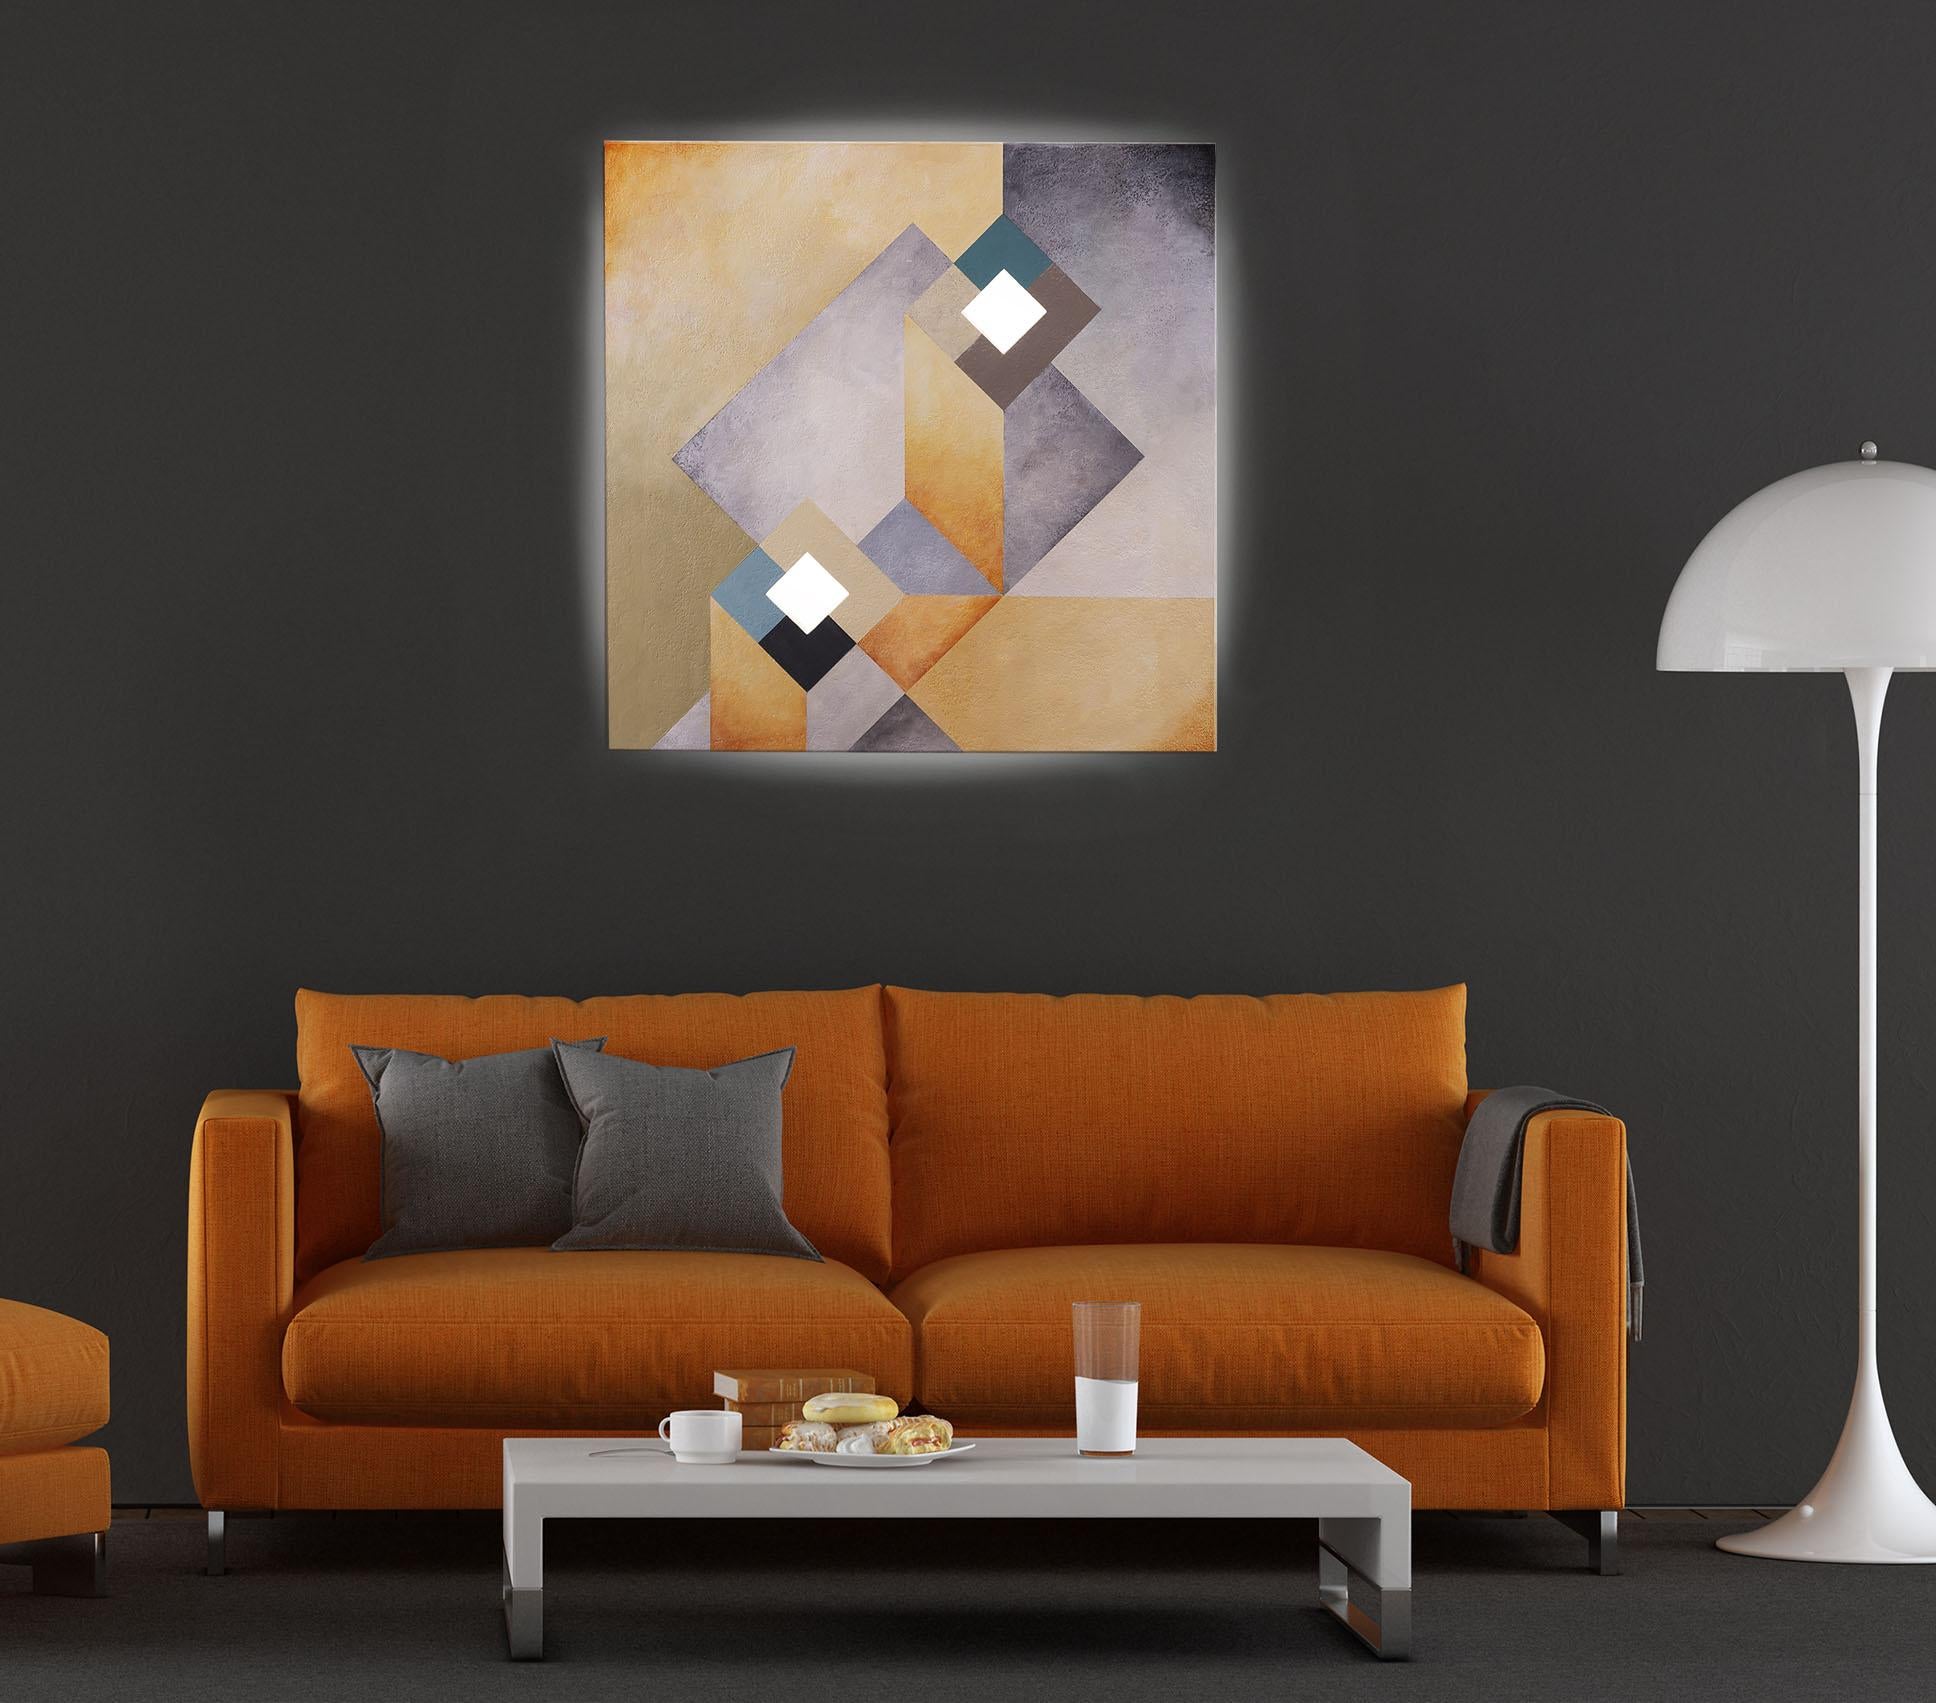 GEOMETRIC ILLUSION. Mixed media textured and acrylic paint on Wood. Separate LED box light. 24H x 24Wx 3D
This series of artwork evokes a novel effect. Light becomes intertwined in the work of art. The wood-based paintings are painted with acrylic,